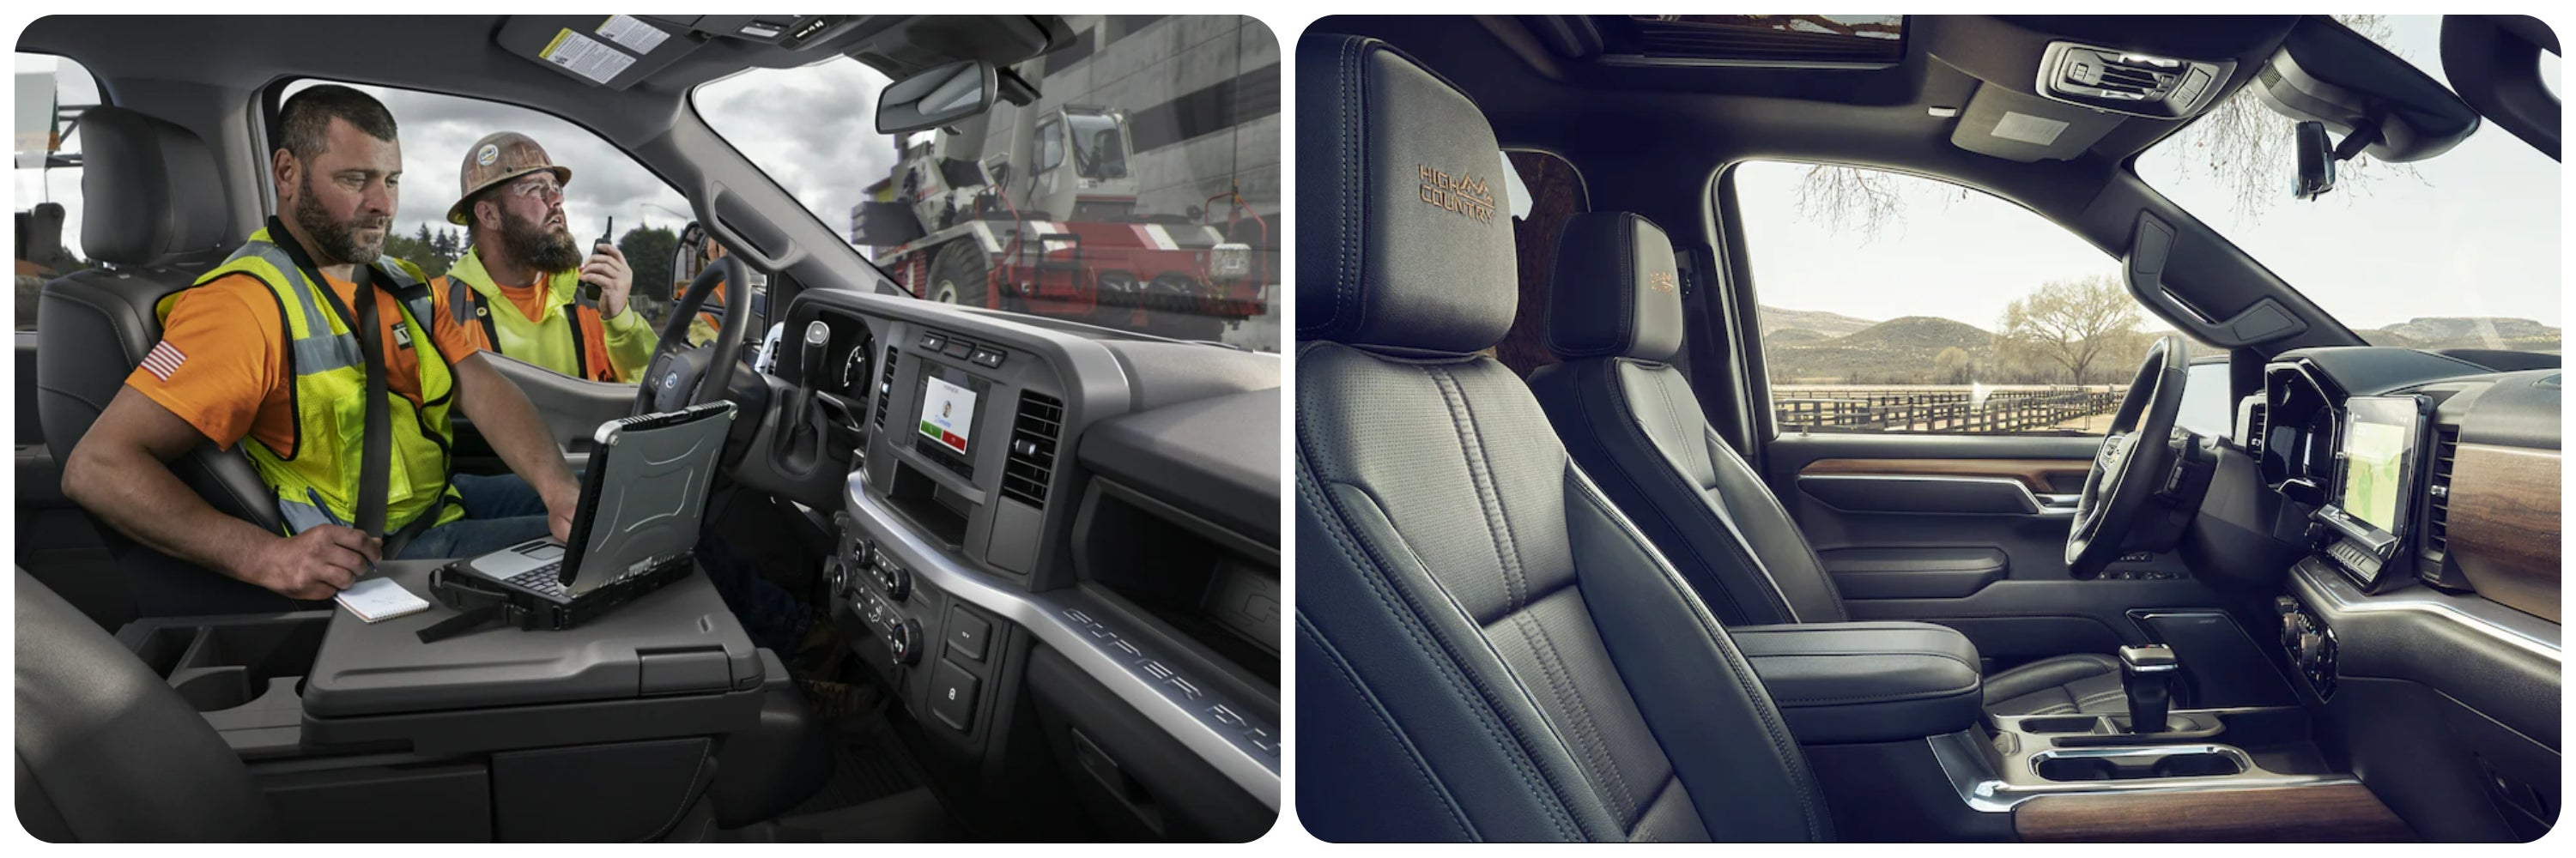 A view of the interior cabin and seating of the 2023 Ford Super Duty on the left and the 2023 Chevy Silverado on the right.